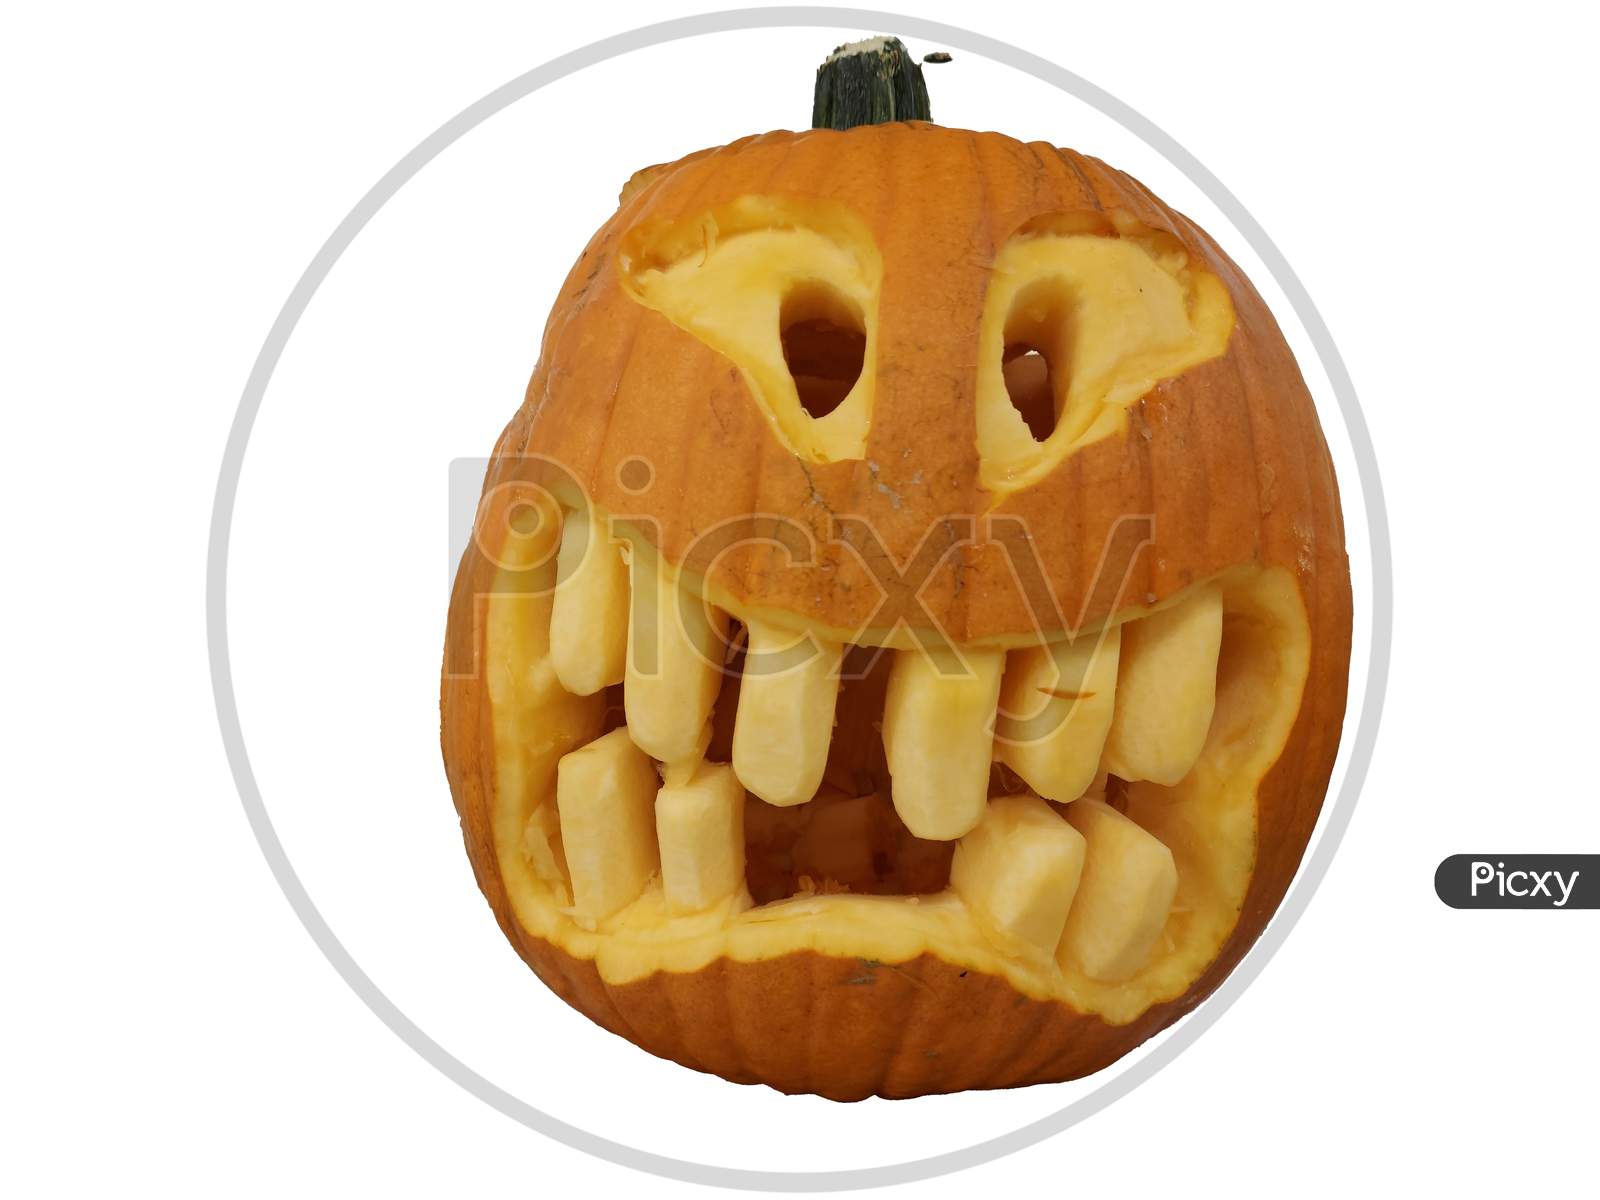 Scary Ghost Face Carving On A Pumpkin For Halloween